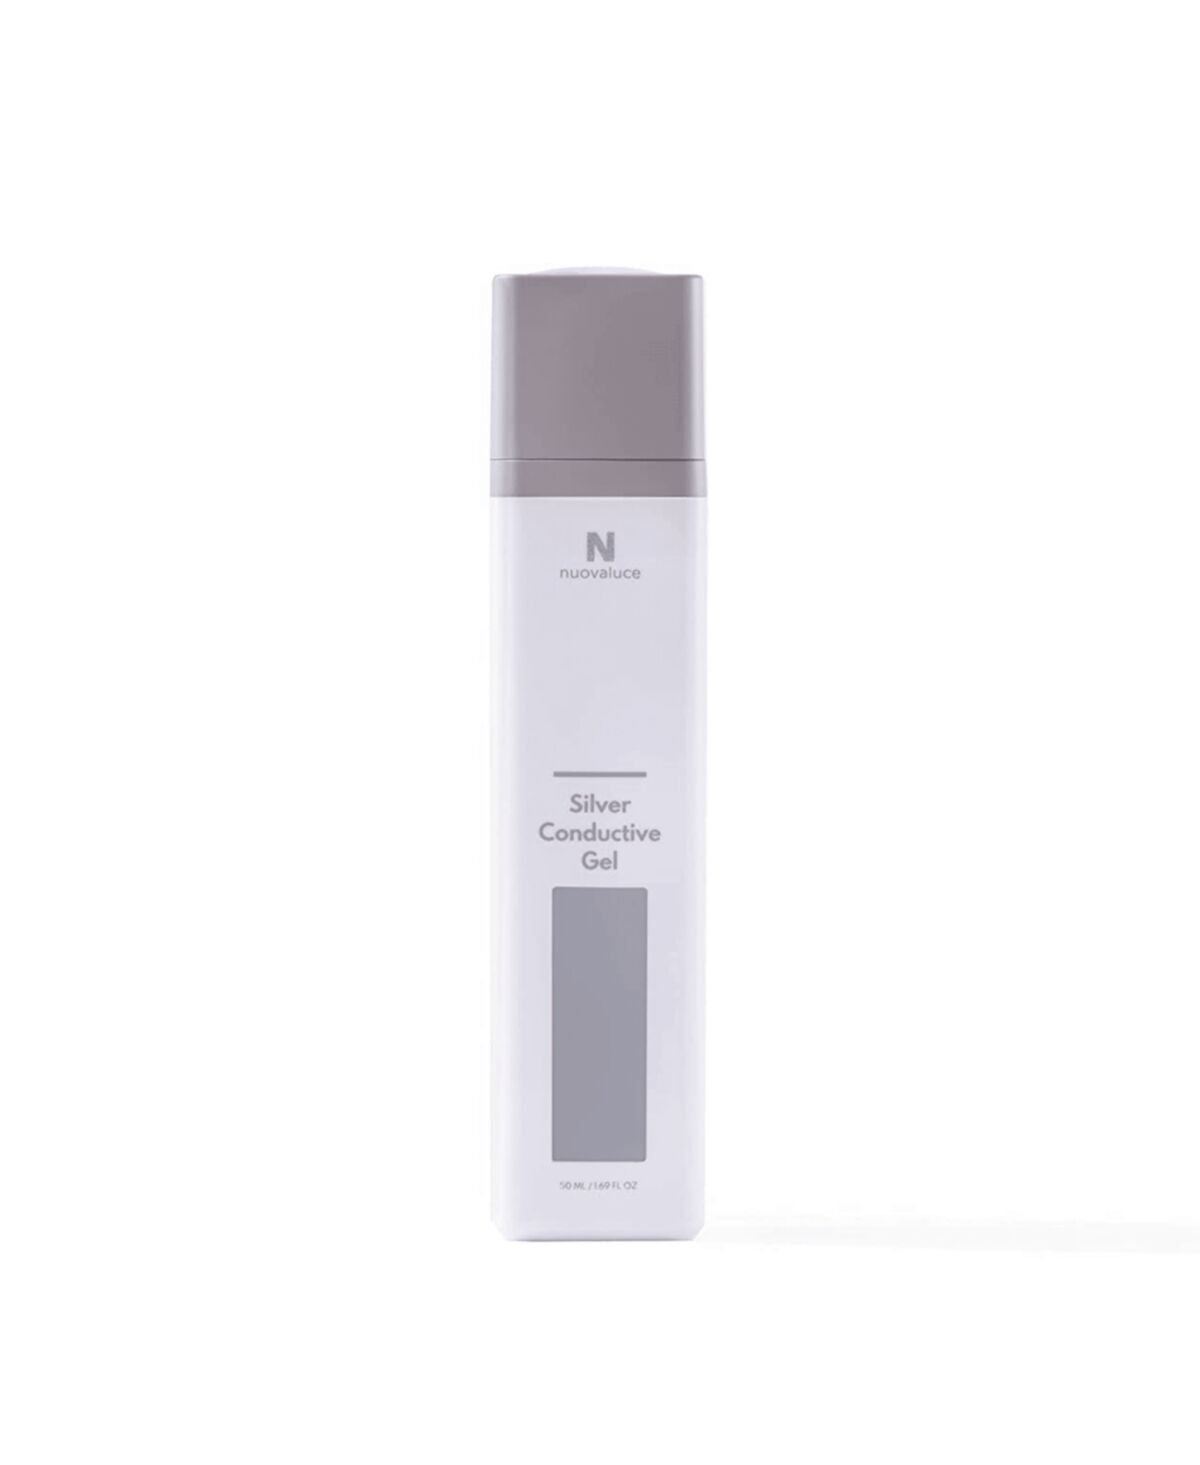 Nuovaluce Beauty Nuovaluce Silver Colloidal Conductive Gel Primer for At-Home Microcurrent Device - Anti Aging, Hydrating & Moisturizing for Face Toning - Conducting G